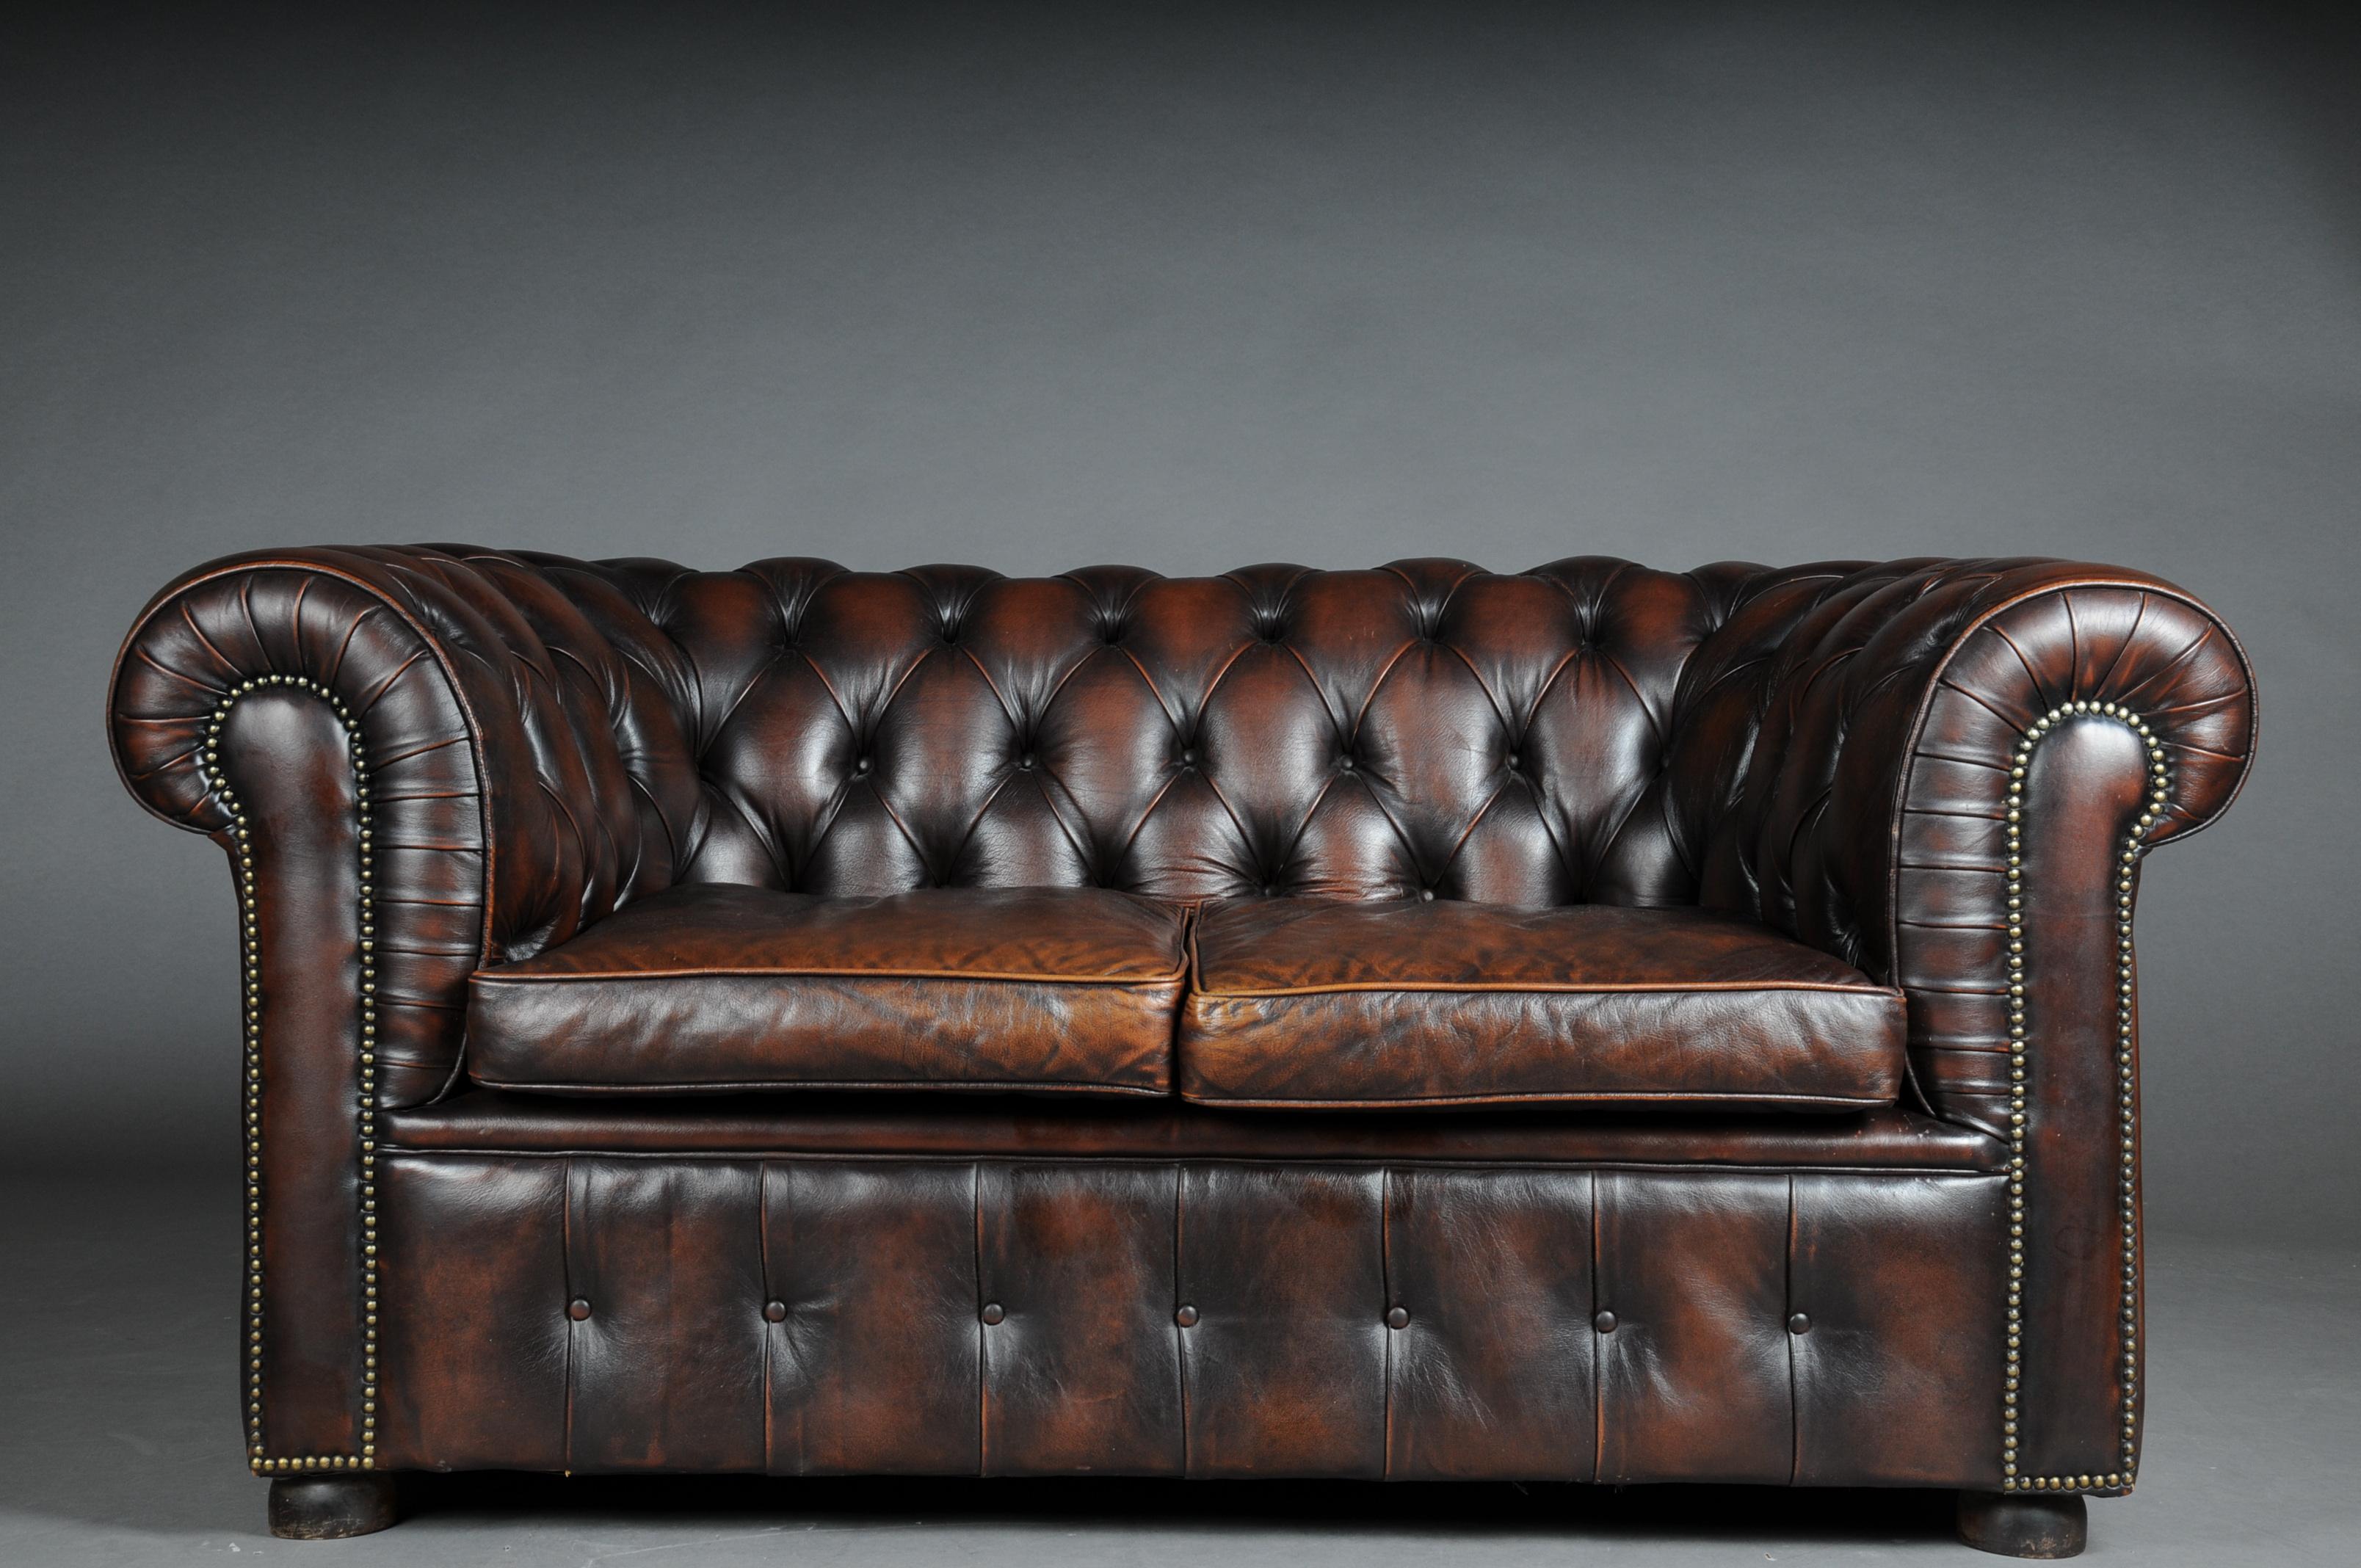 Exclusive Chesterfield couch / sofa, brown

Old Chesterfield 2 seater sofa / couch, real leather vintage. Dark brown. Removable seat cushion.
Elegant and timeless - classic Chesterfield design for every ambience and for more style. The 2-seater